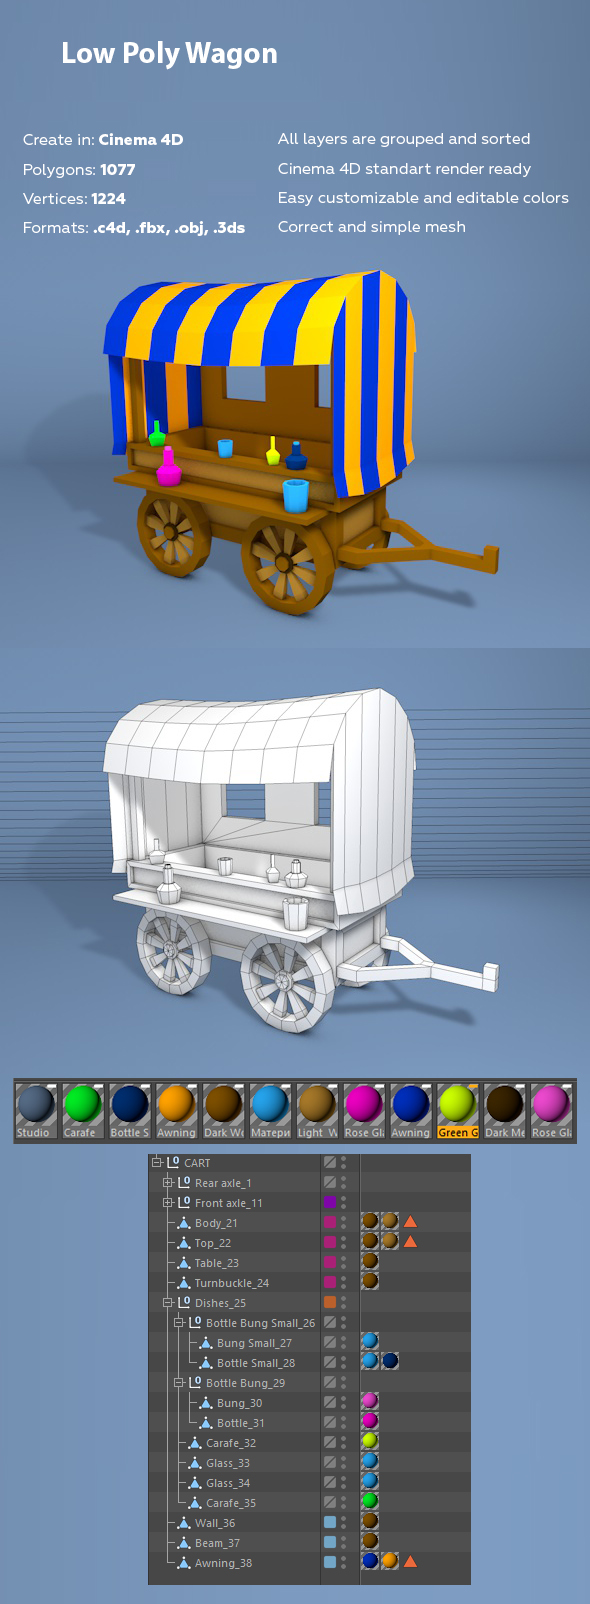 Low Poly Wagon - 3Docean 24203708